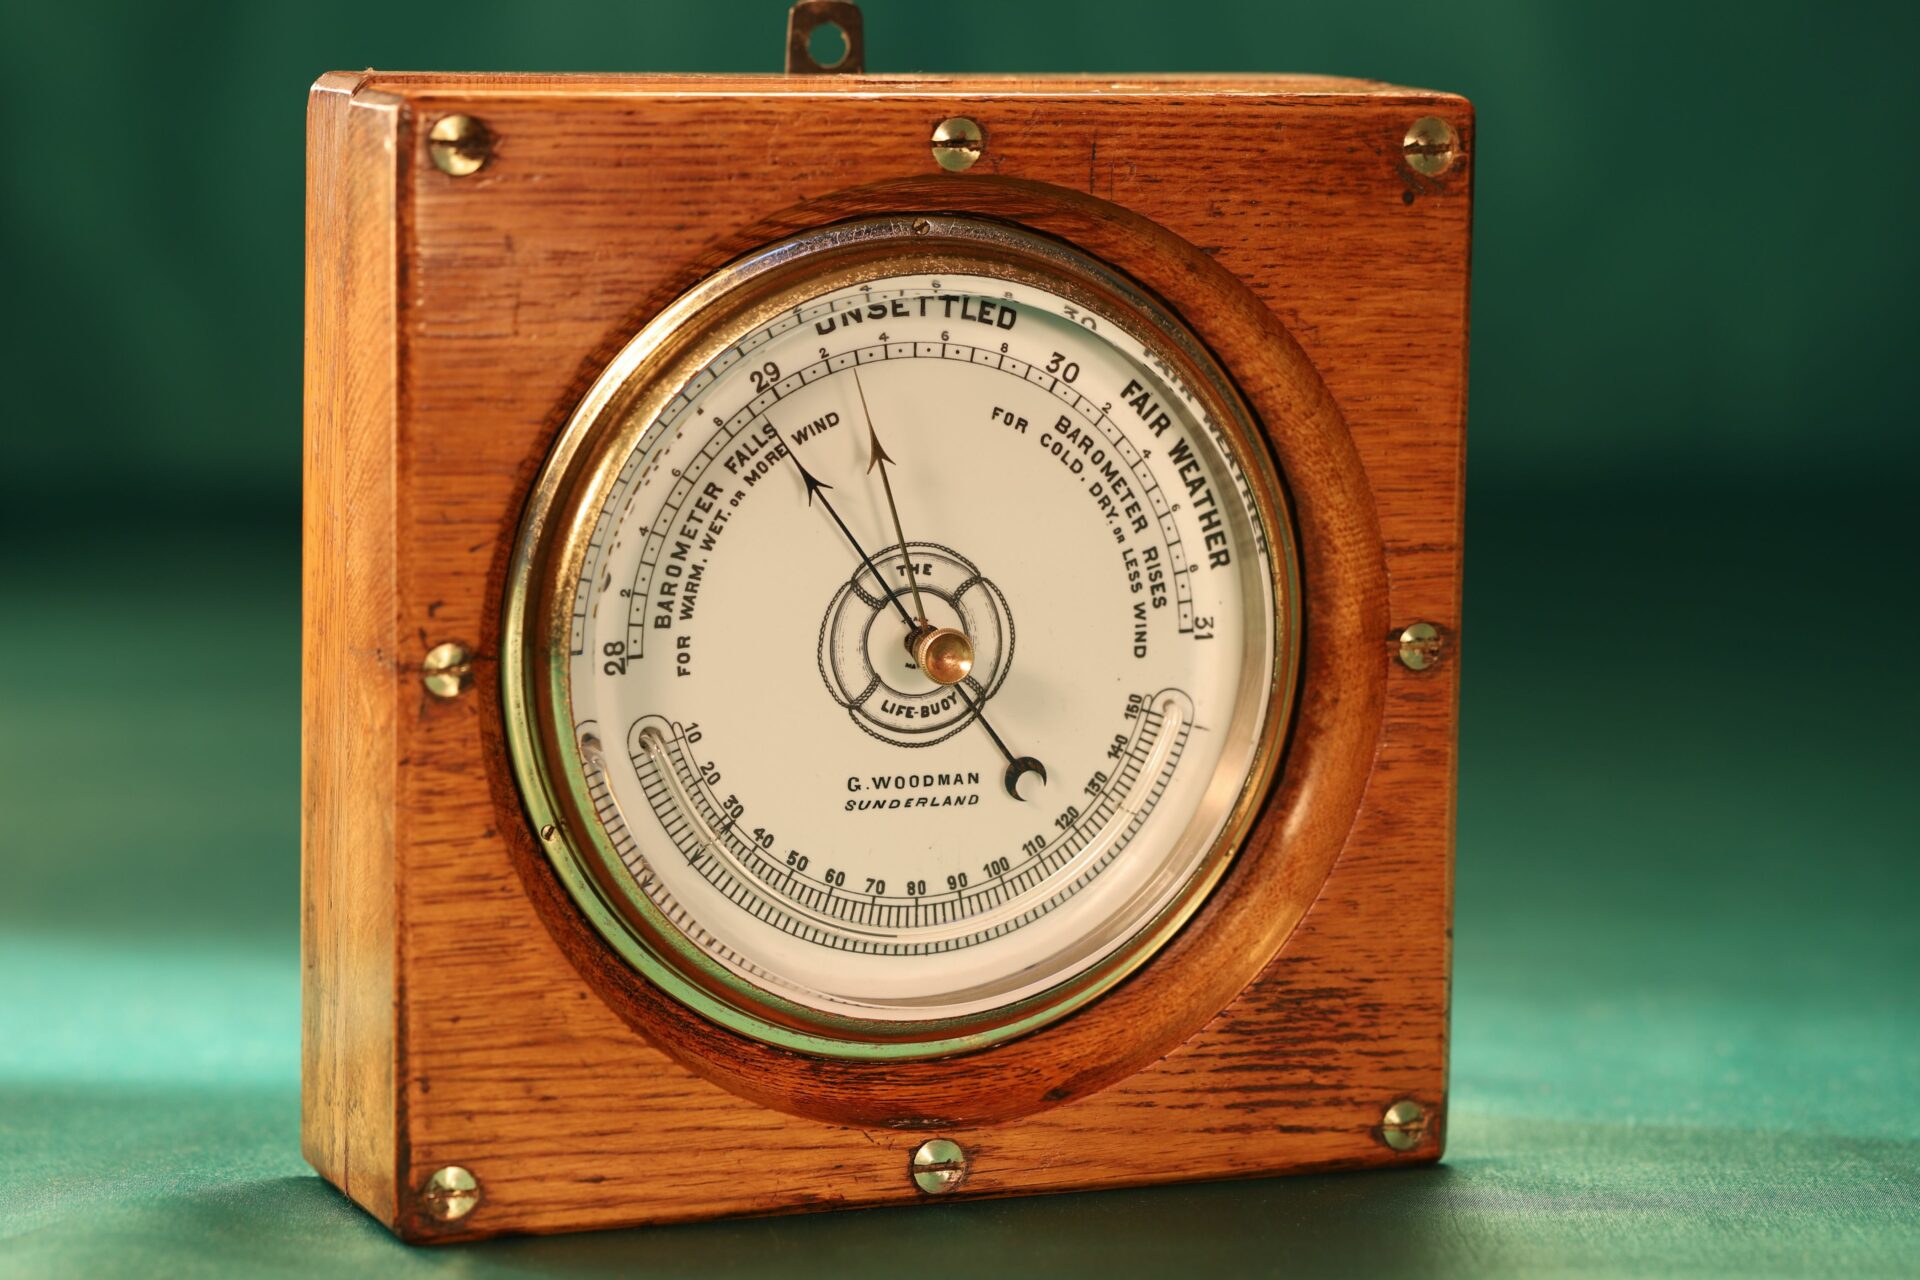 Image of front of The Life-Buoy Barometer by Dollond c1885 taken from left